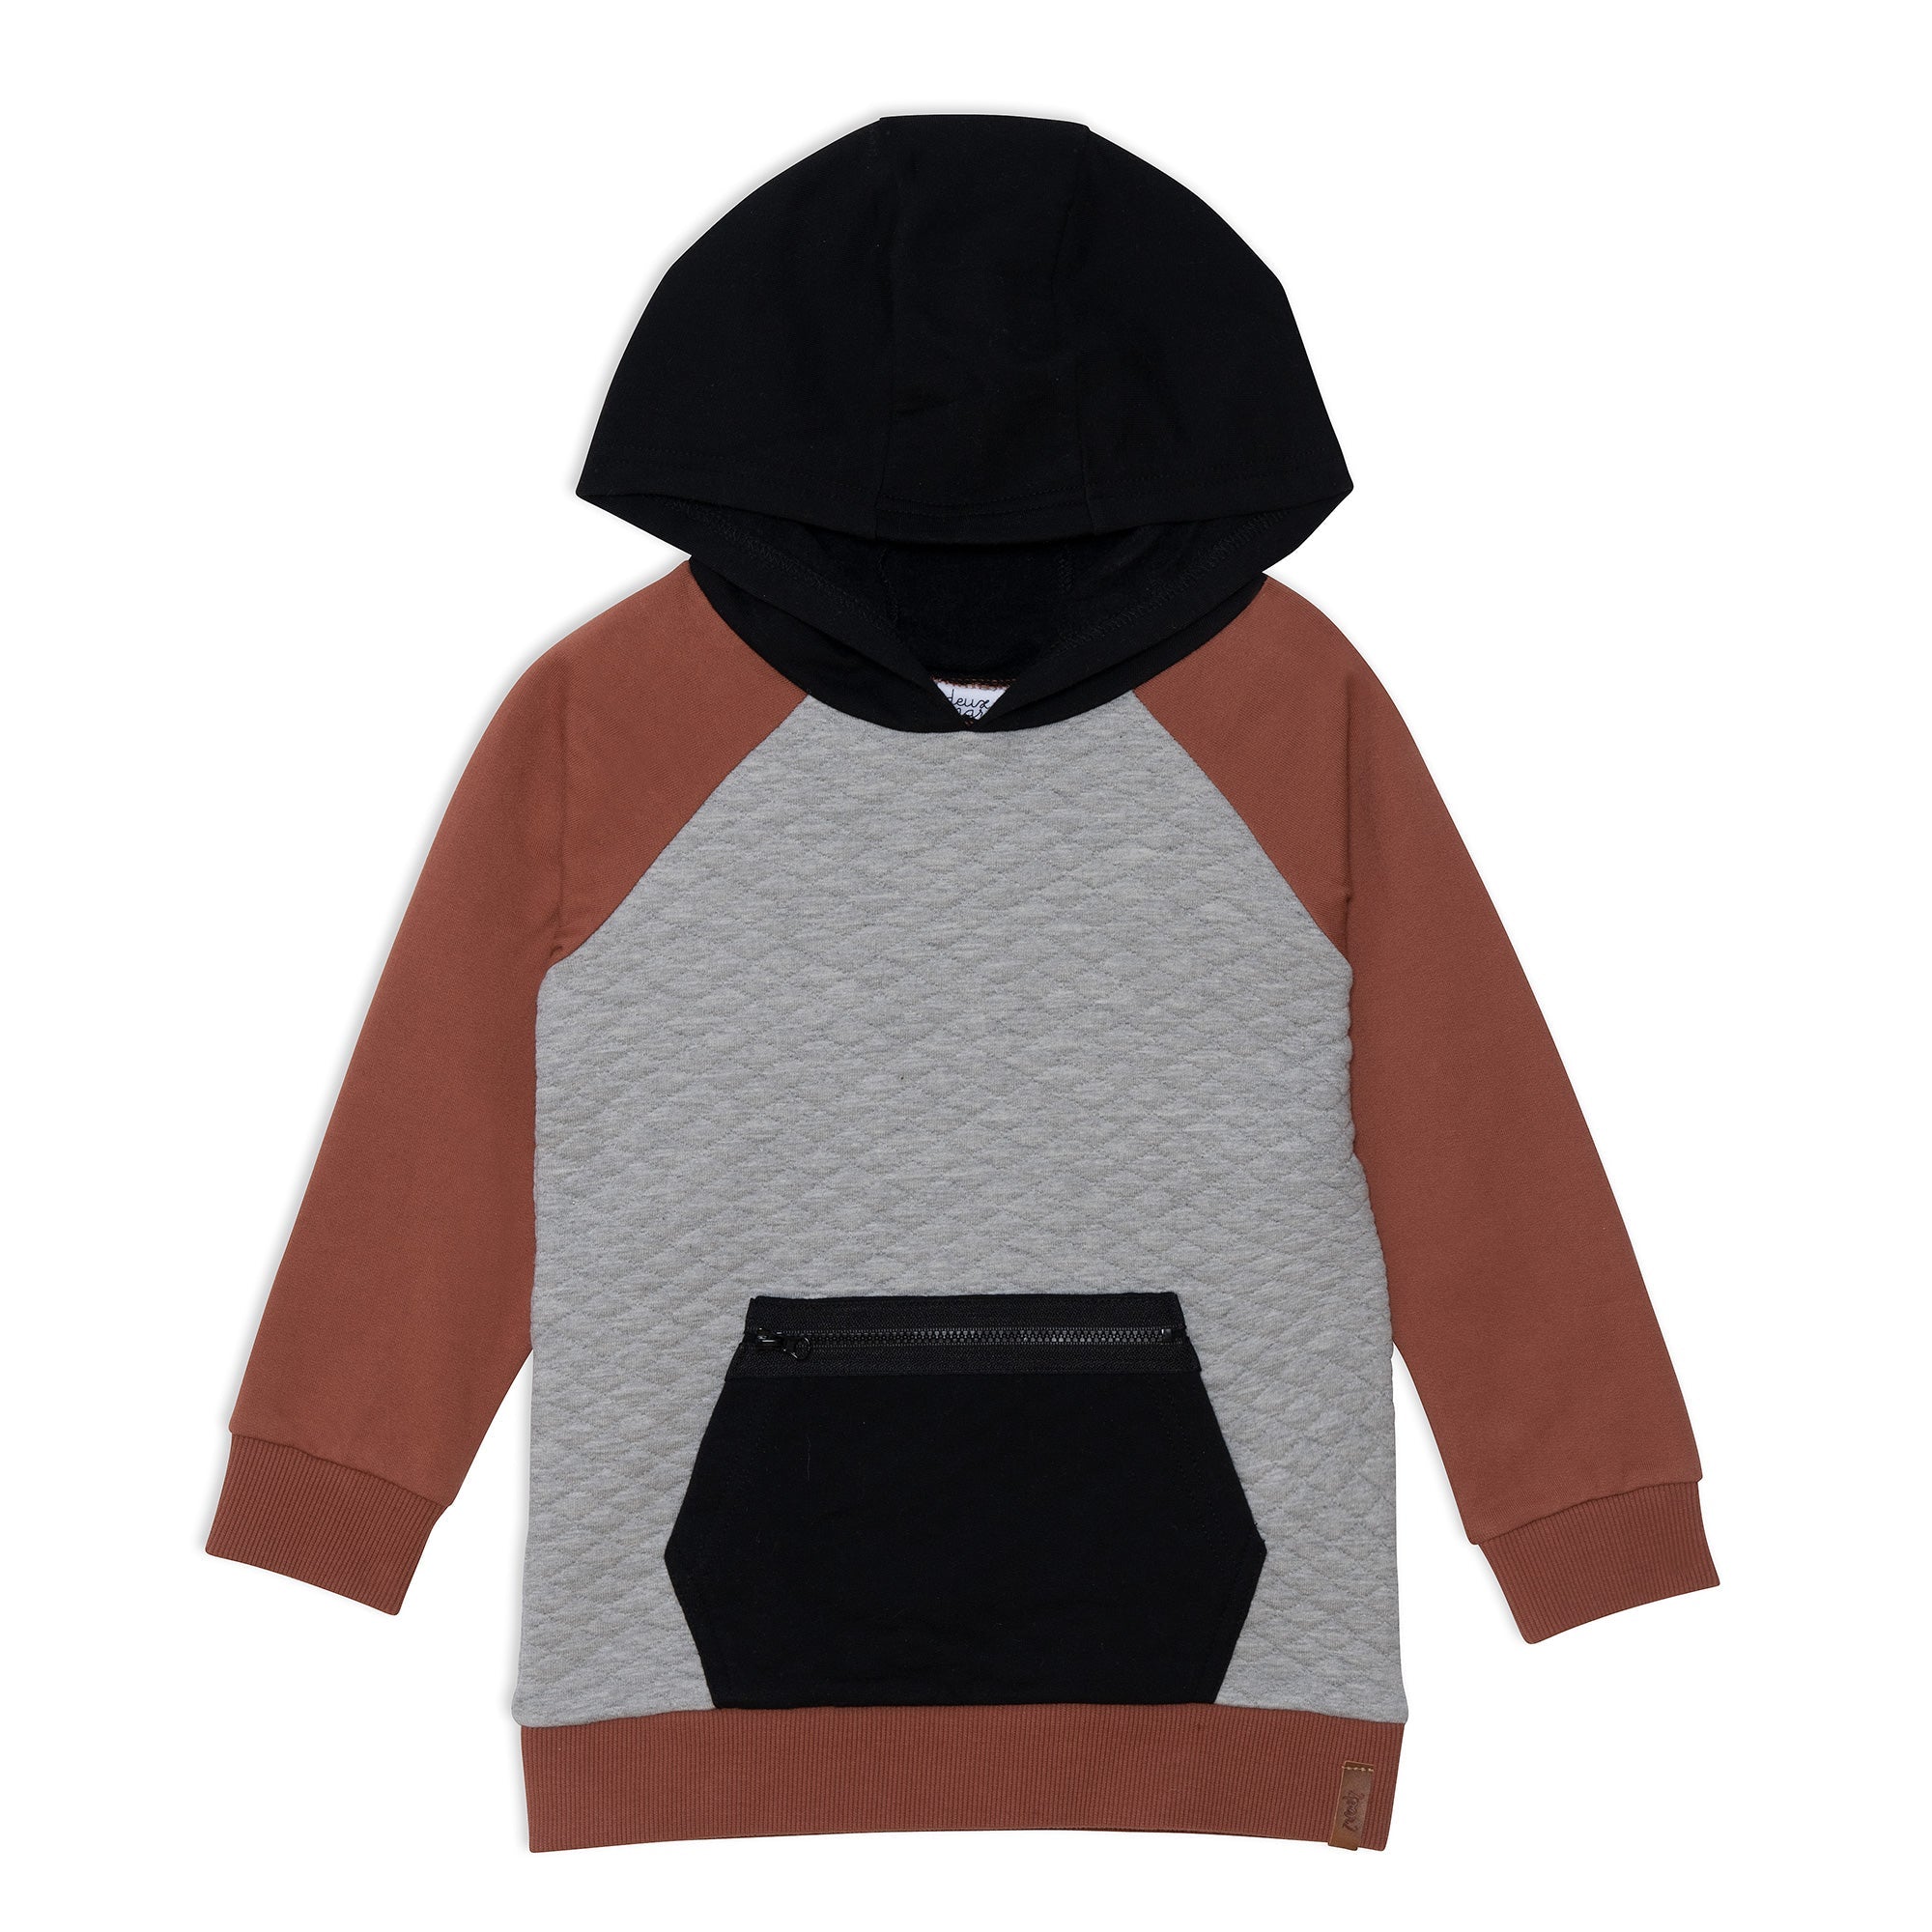 Quilted Hooded Fleece Top With Zipper Pocket Light Heather Grey, Black And Brown